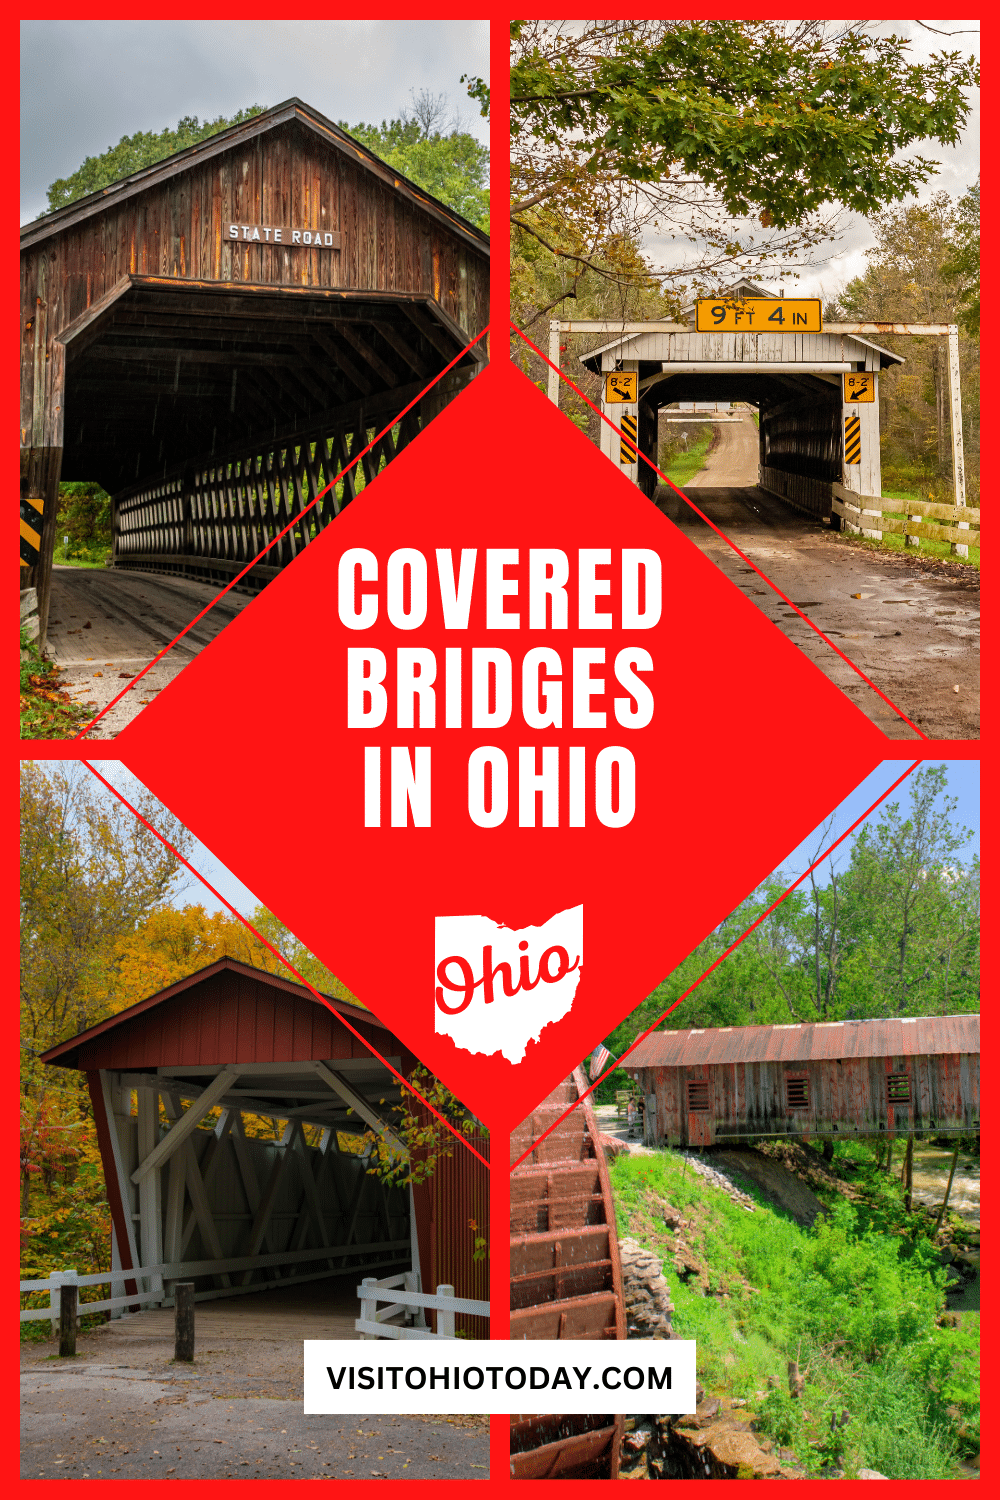 There are some amazing covered bridges in Ohio. Below are 12 of the best-covered bridges that you will be able to find in our great State.